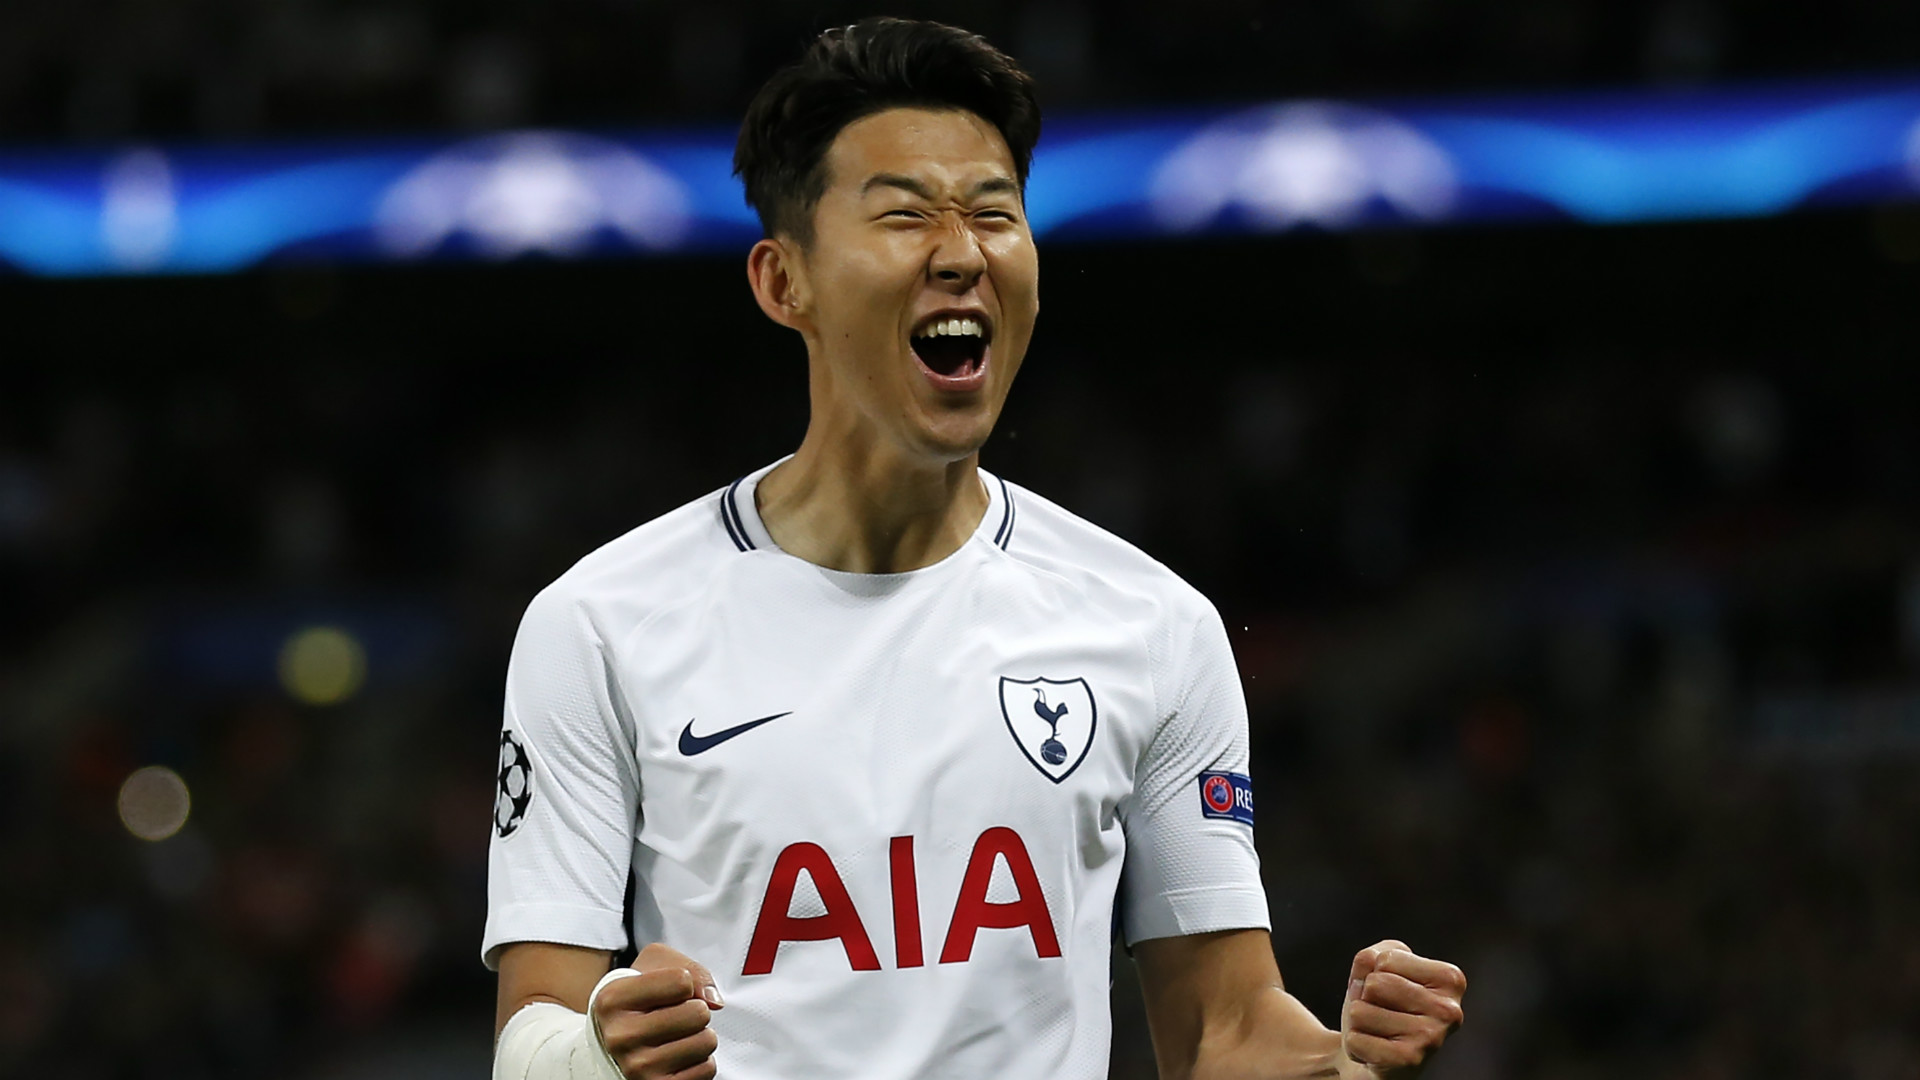 Fantasy Football: Son, Moreno and other Premier League players who